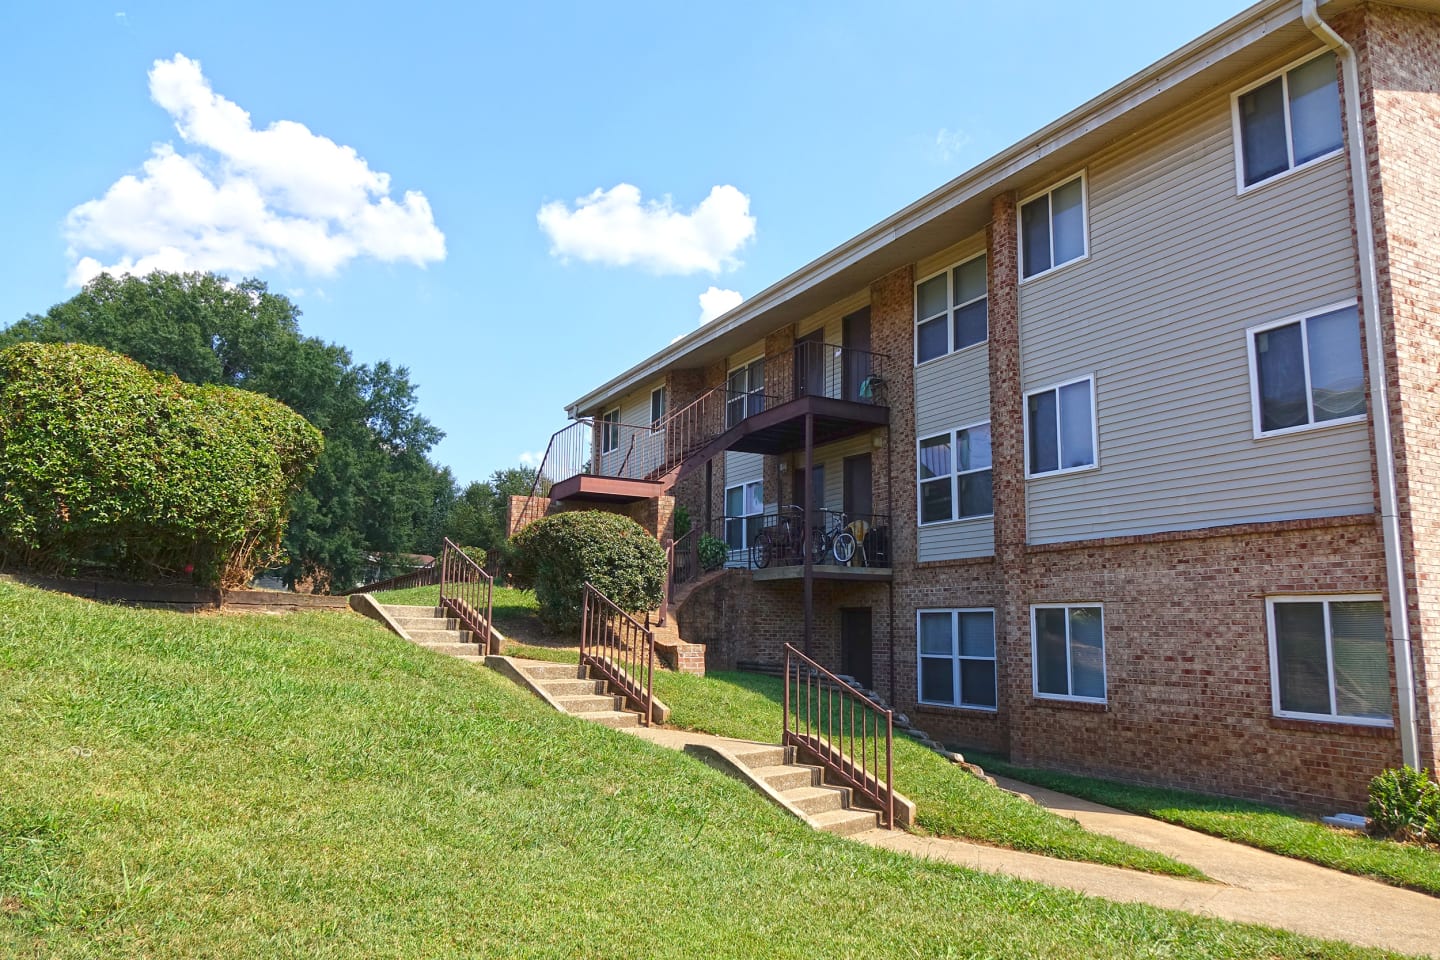 SPRING VALLEY APARTMENTS